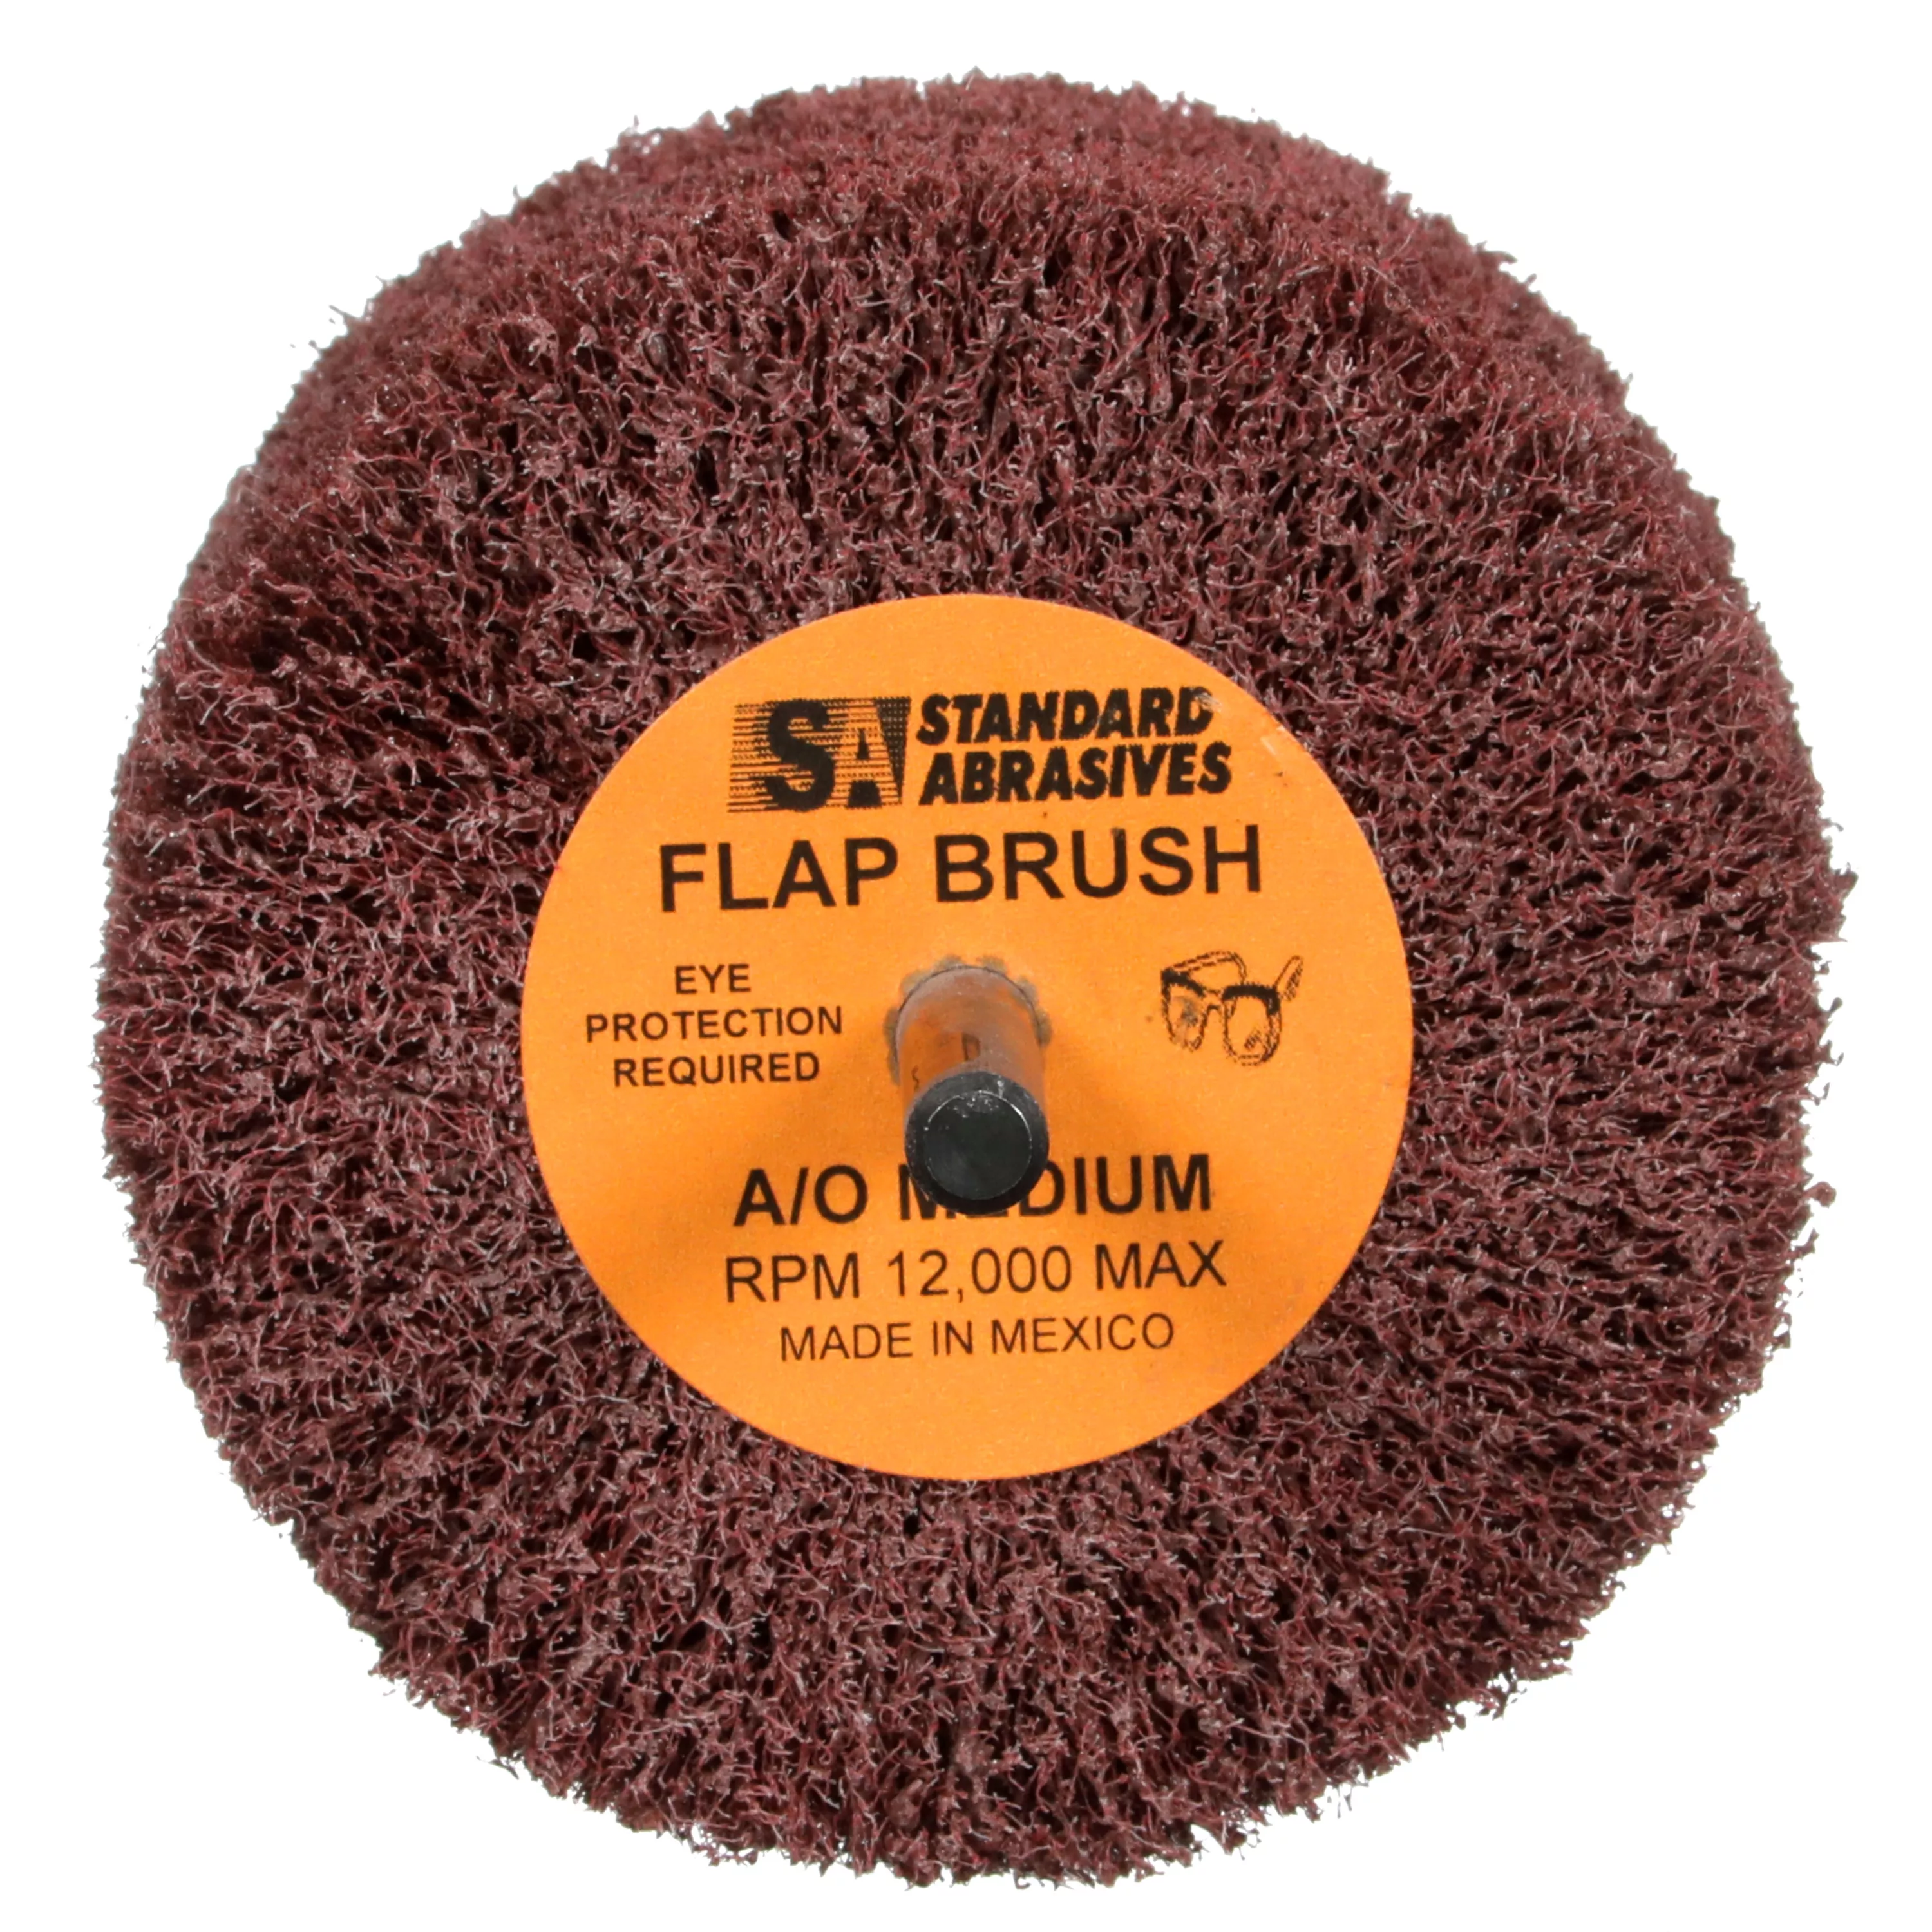 Standard Abrasives™ Buff and Blend GP Mounted Flap Brush, 875501,
Medium, 3 in x 2 in x 1/4 in, 5/Carton, 50 ea/Case